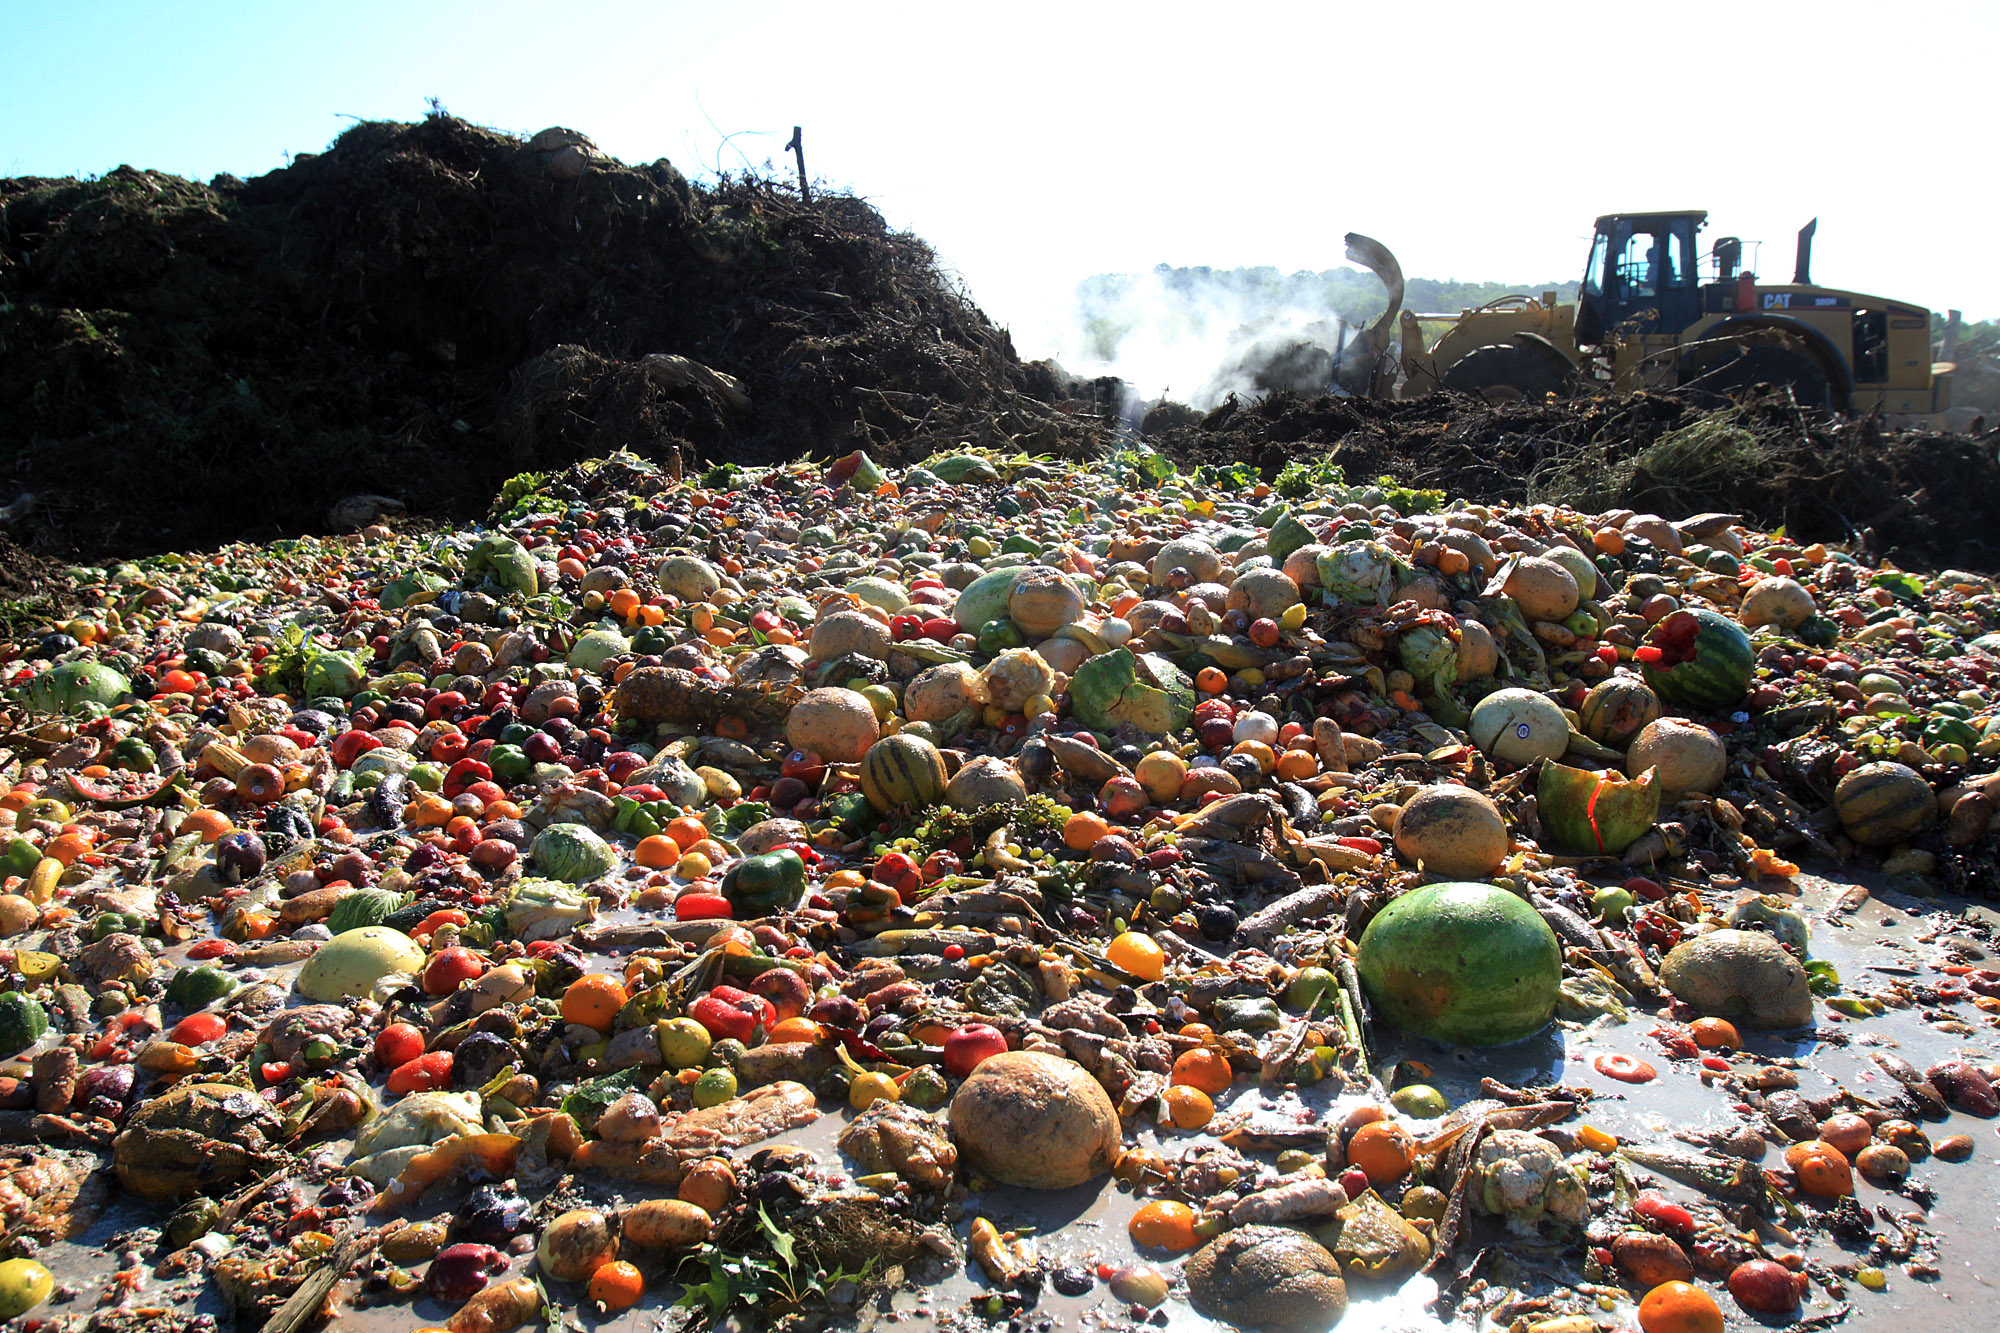 China's Food Waste Challenge - Collective Responsibility